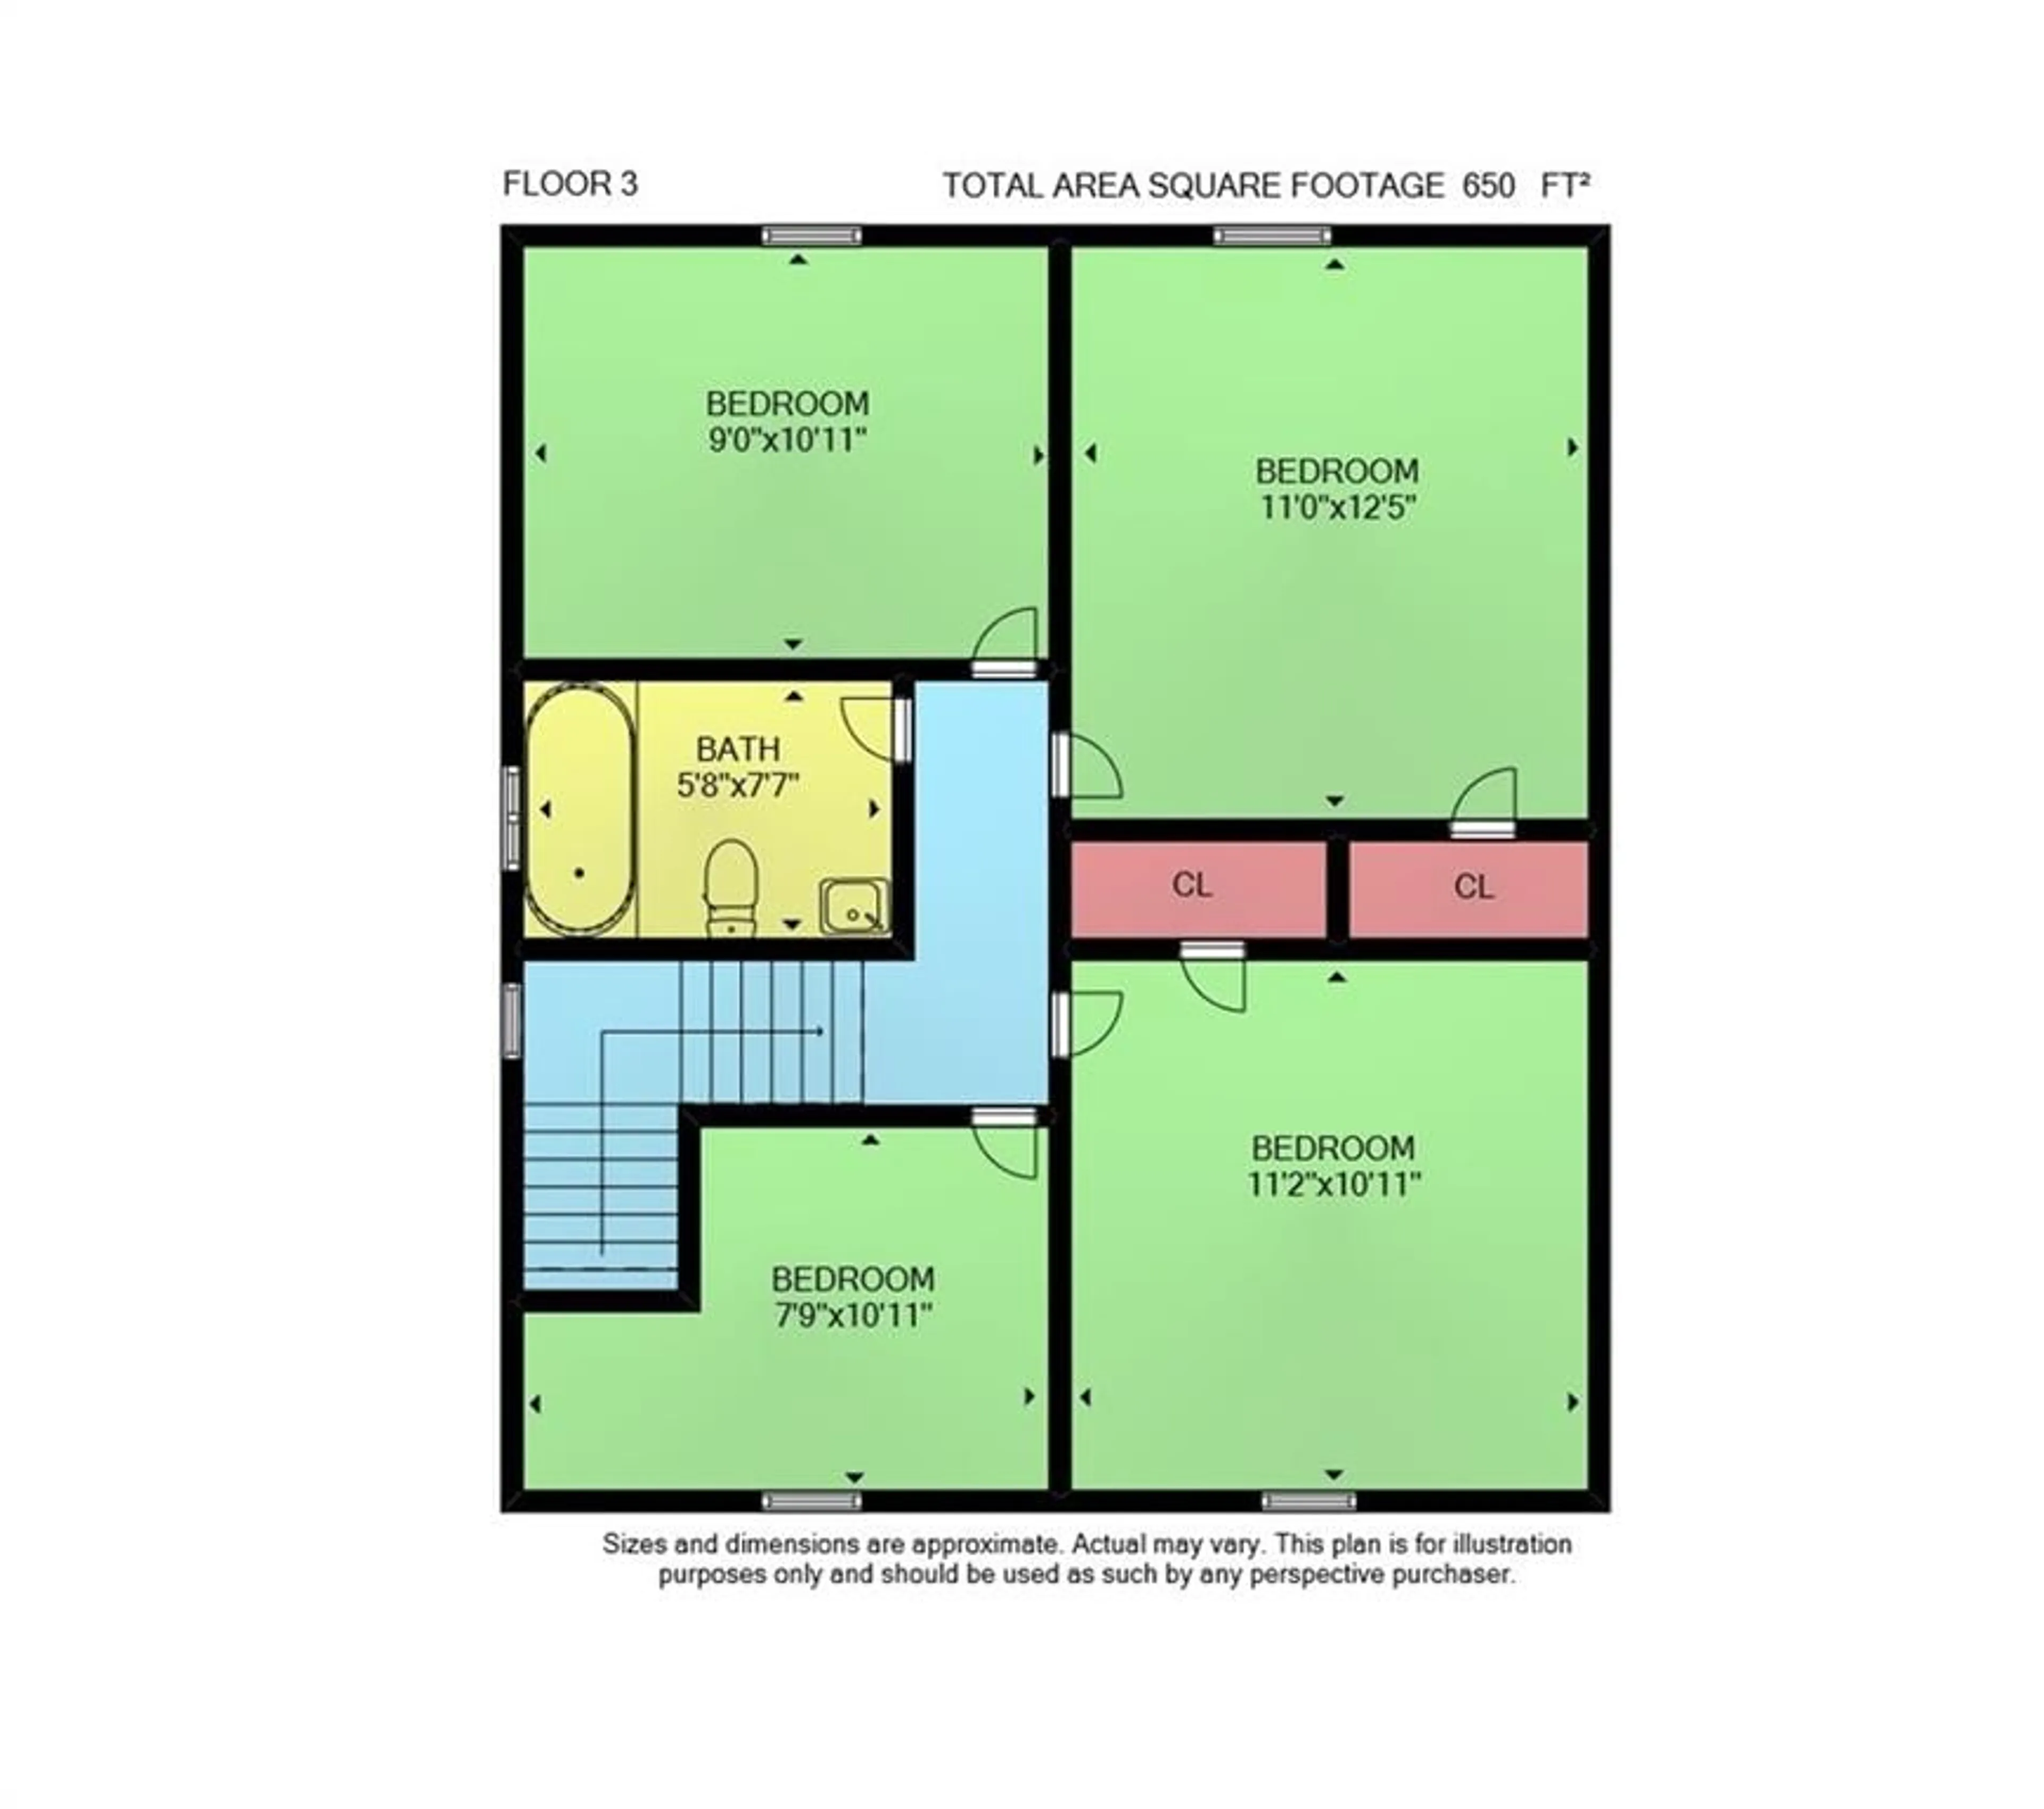 Floor plan for 193 QUEENSTON St, St. Catharines Ontario L2R 3A4